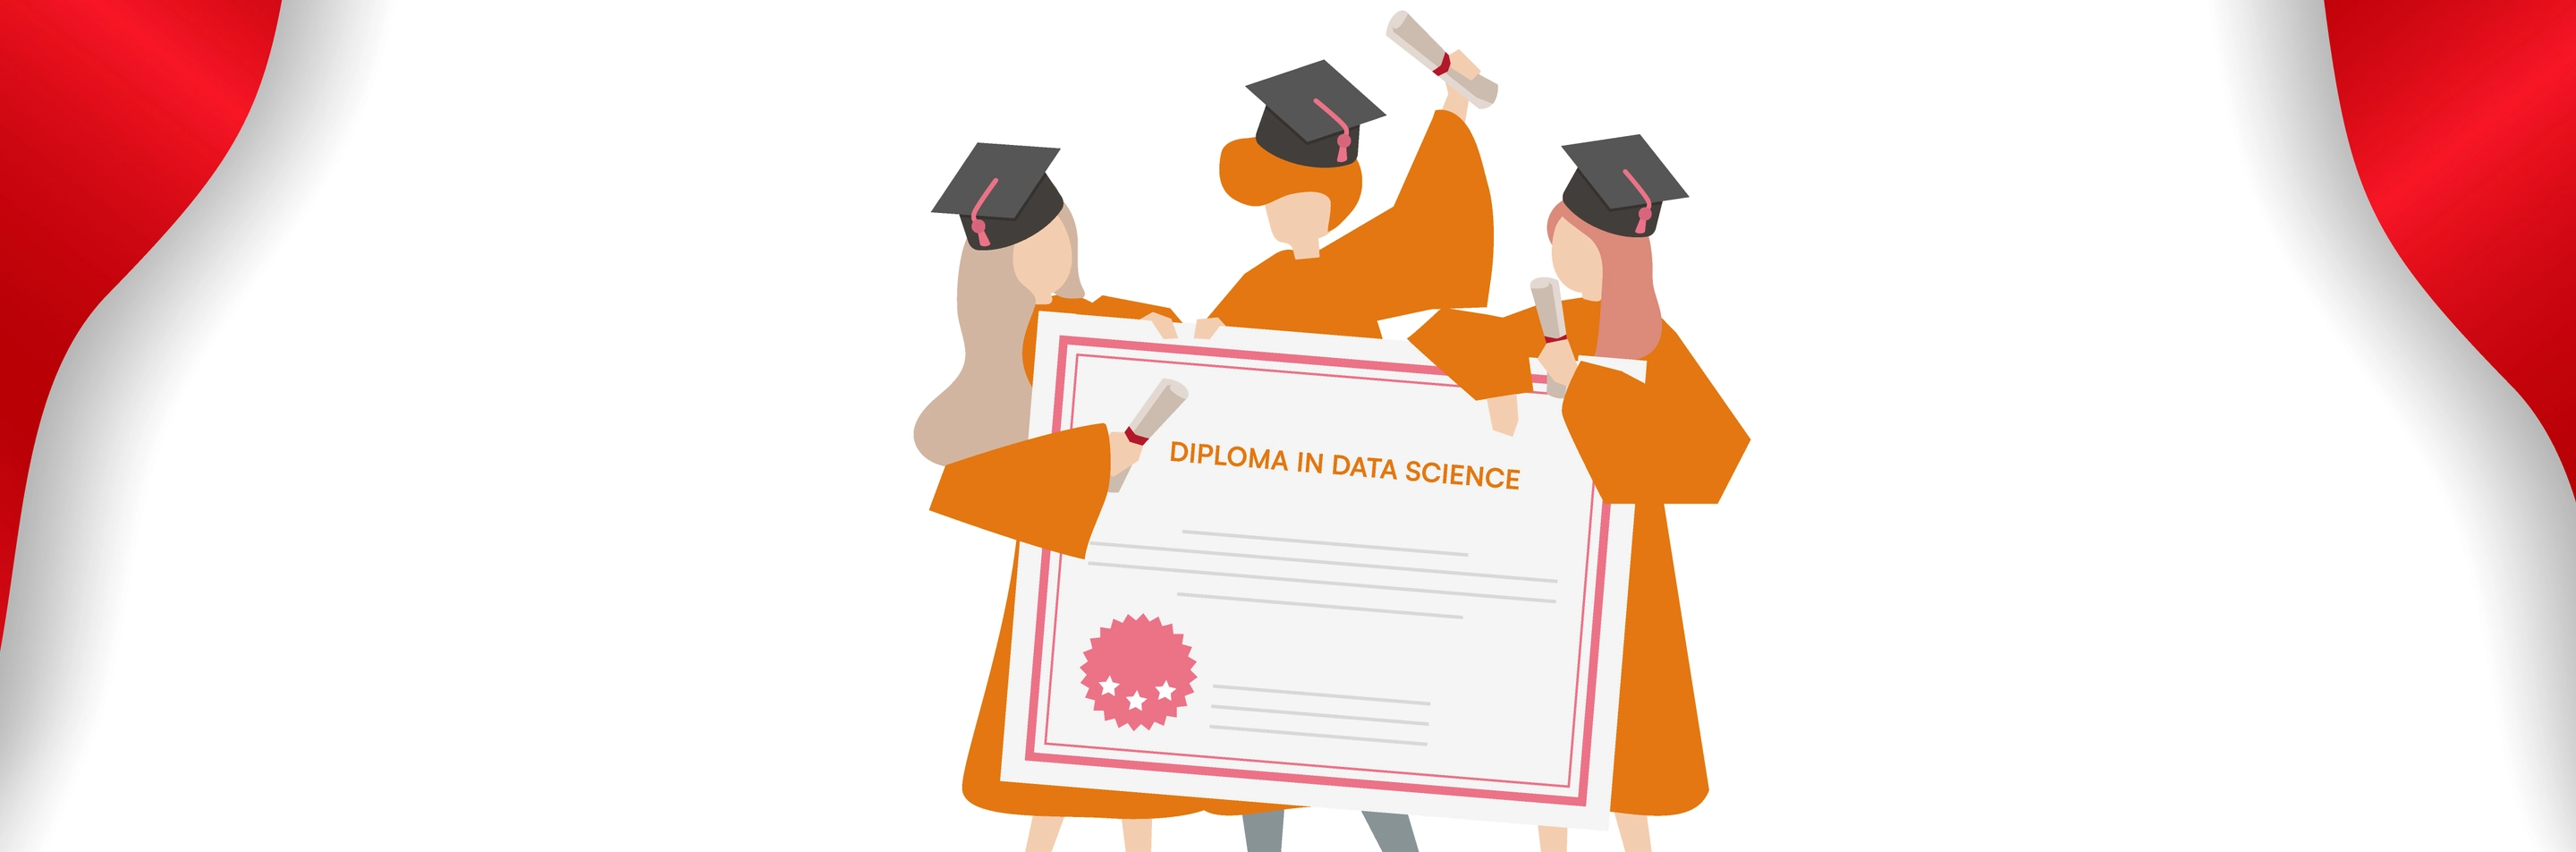 PG Diploma in Data Science in Canada: Know About PG Diploma in Data Science in Canada Universities, Fees, Eligibility, Scholarships, Jobs Image